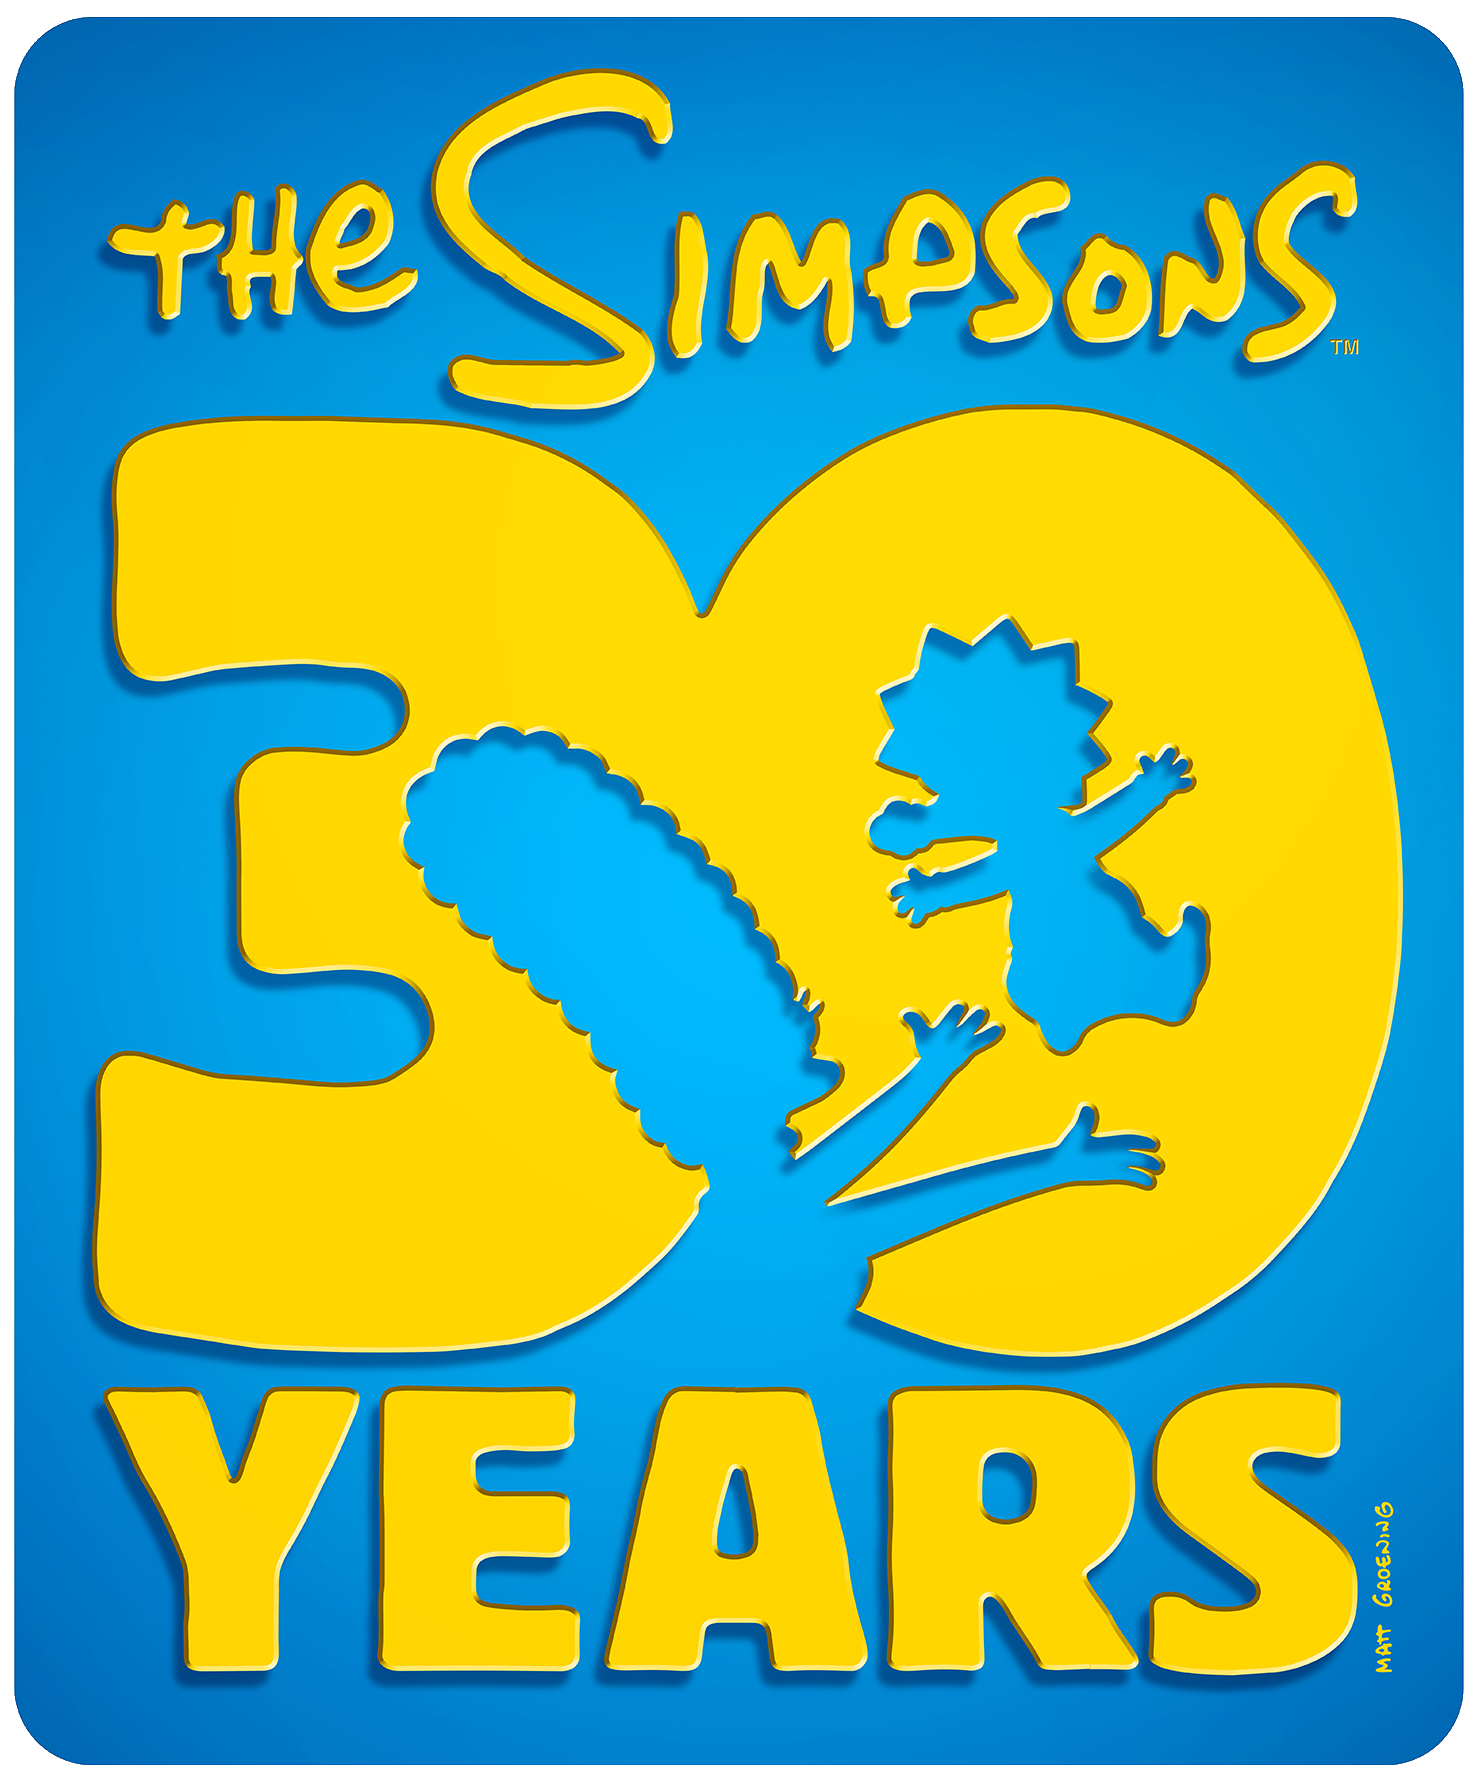 The Simpsons 30 Years